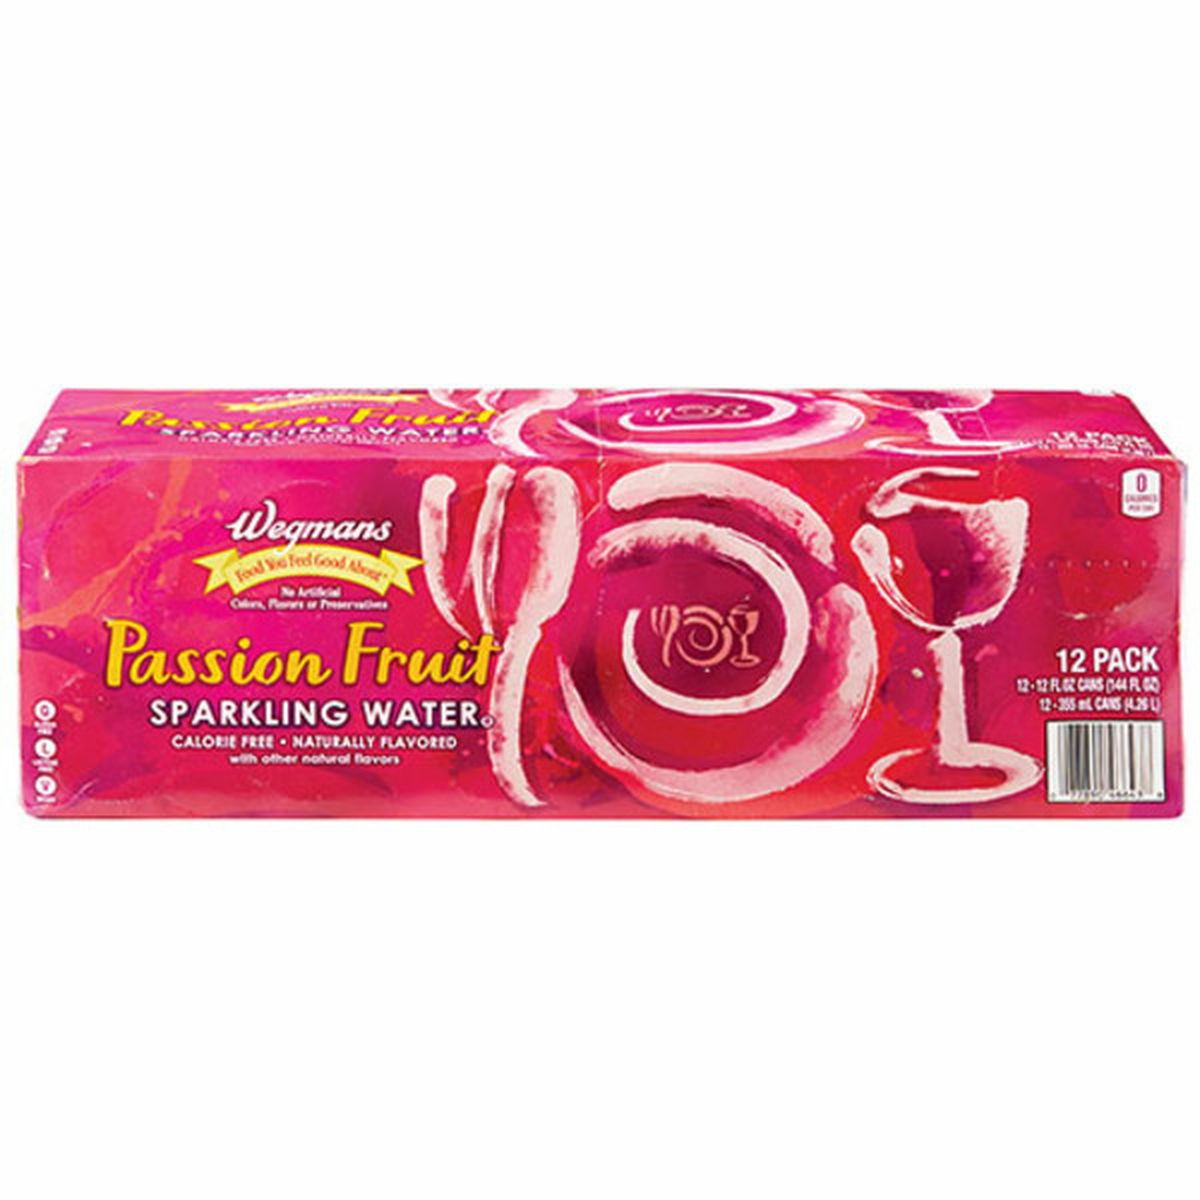 Calories in Wegmans Sparkling Water Passion Fruit, 12 Pack